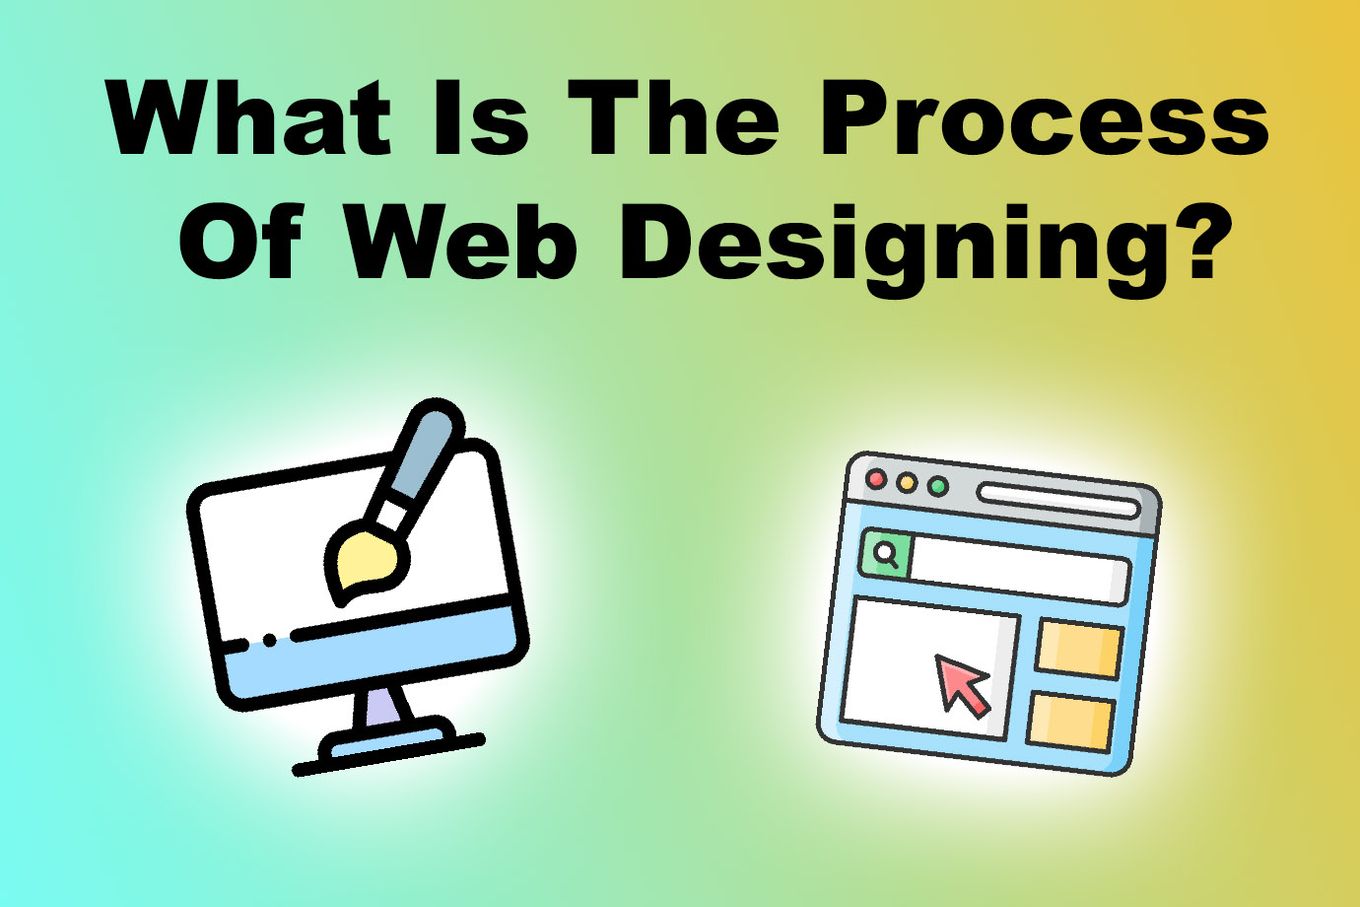 What Is The Process Of Web Designing?